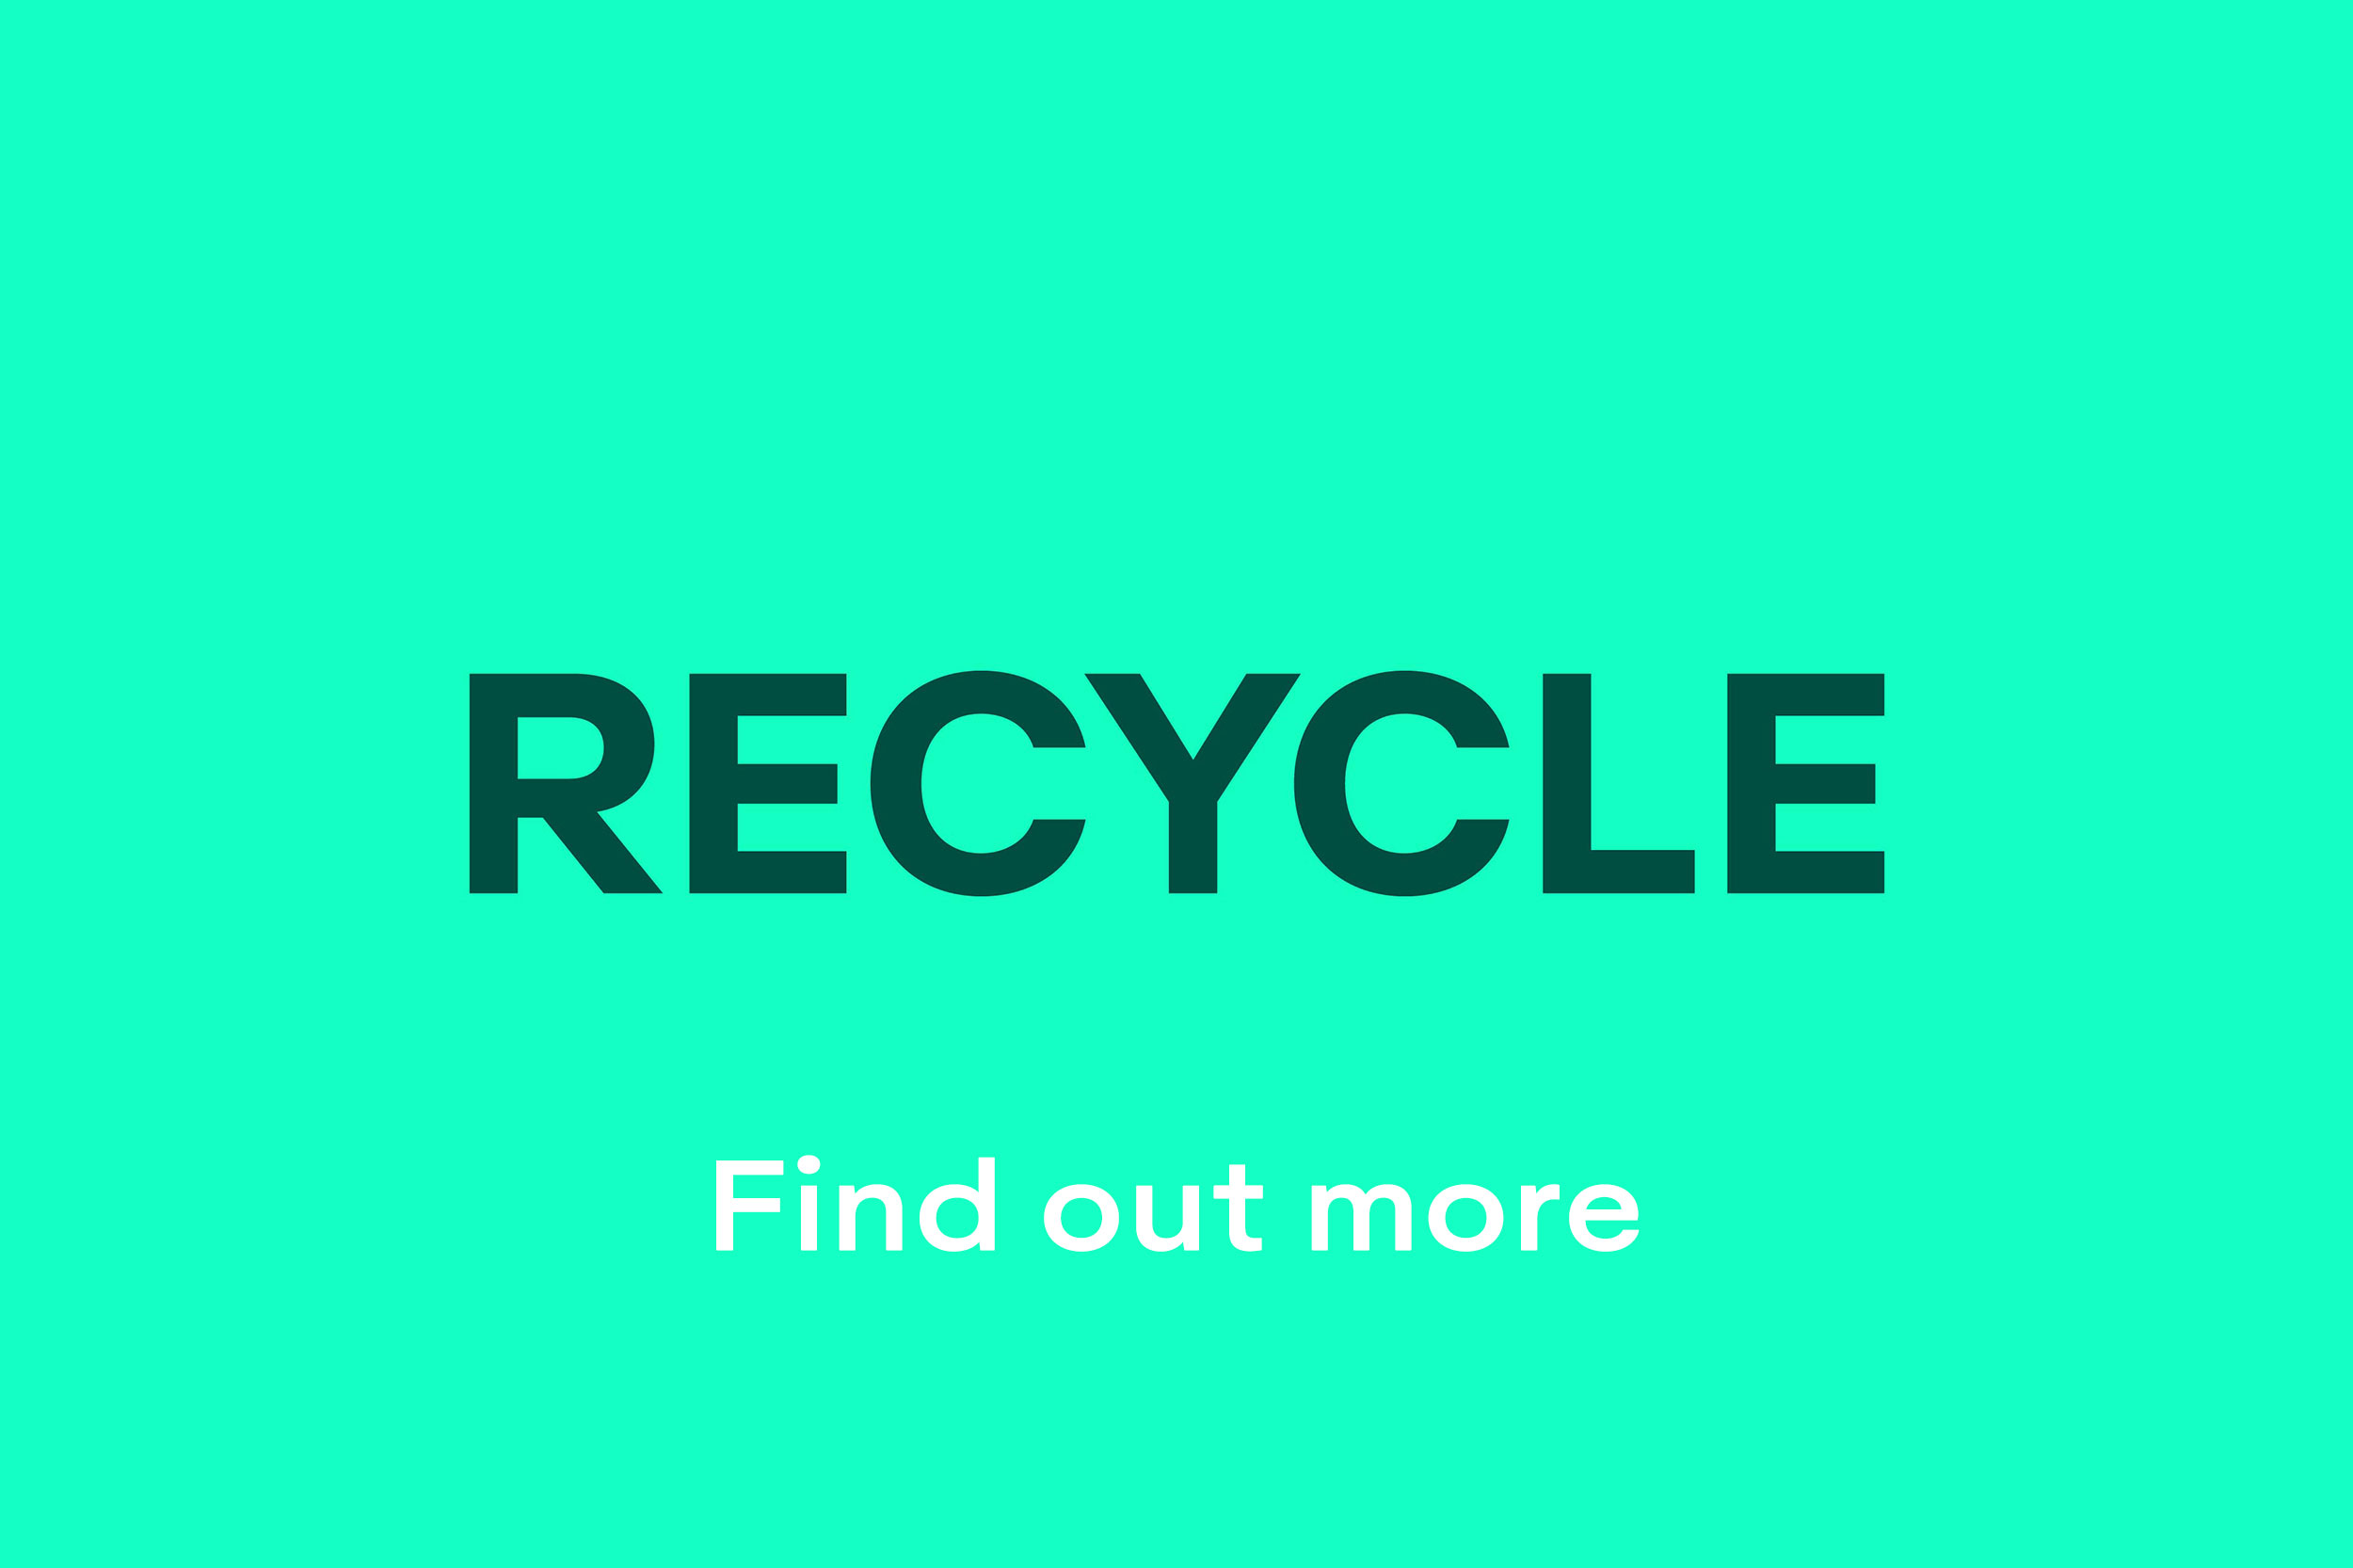 Recycle - Find out more